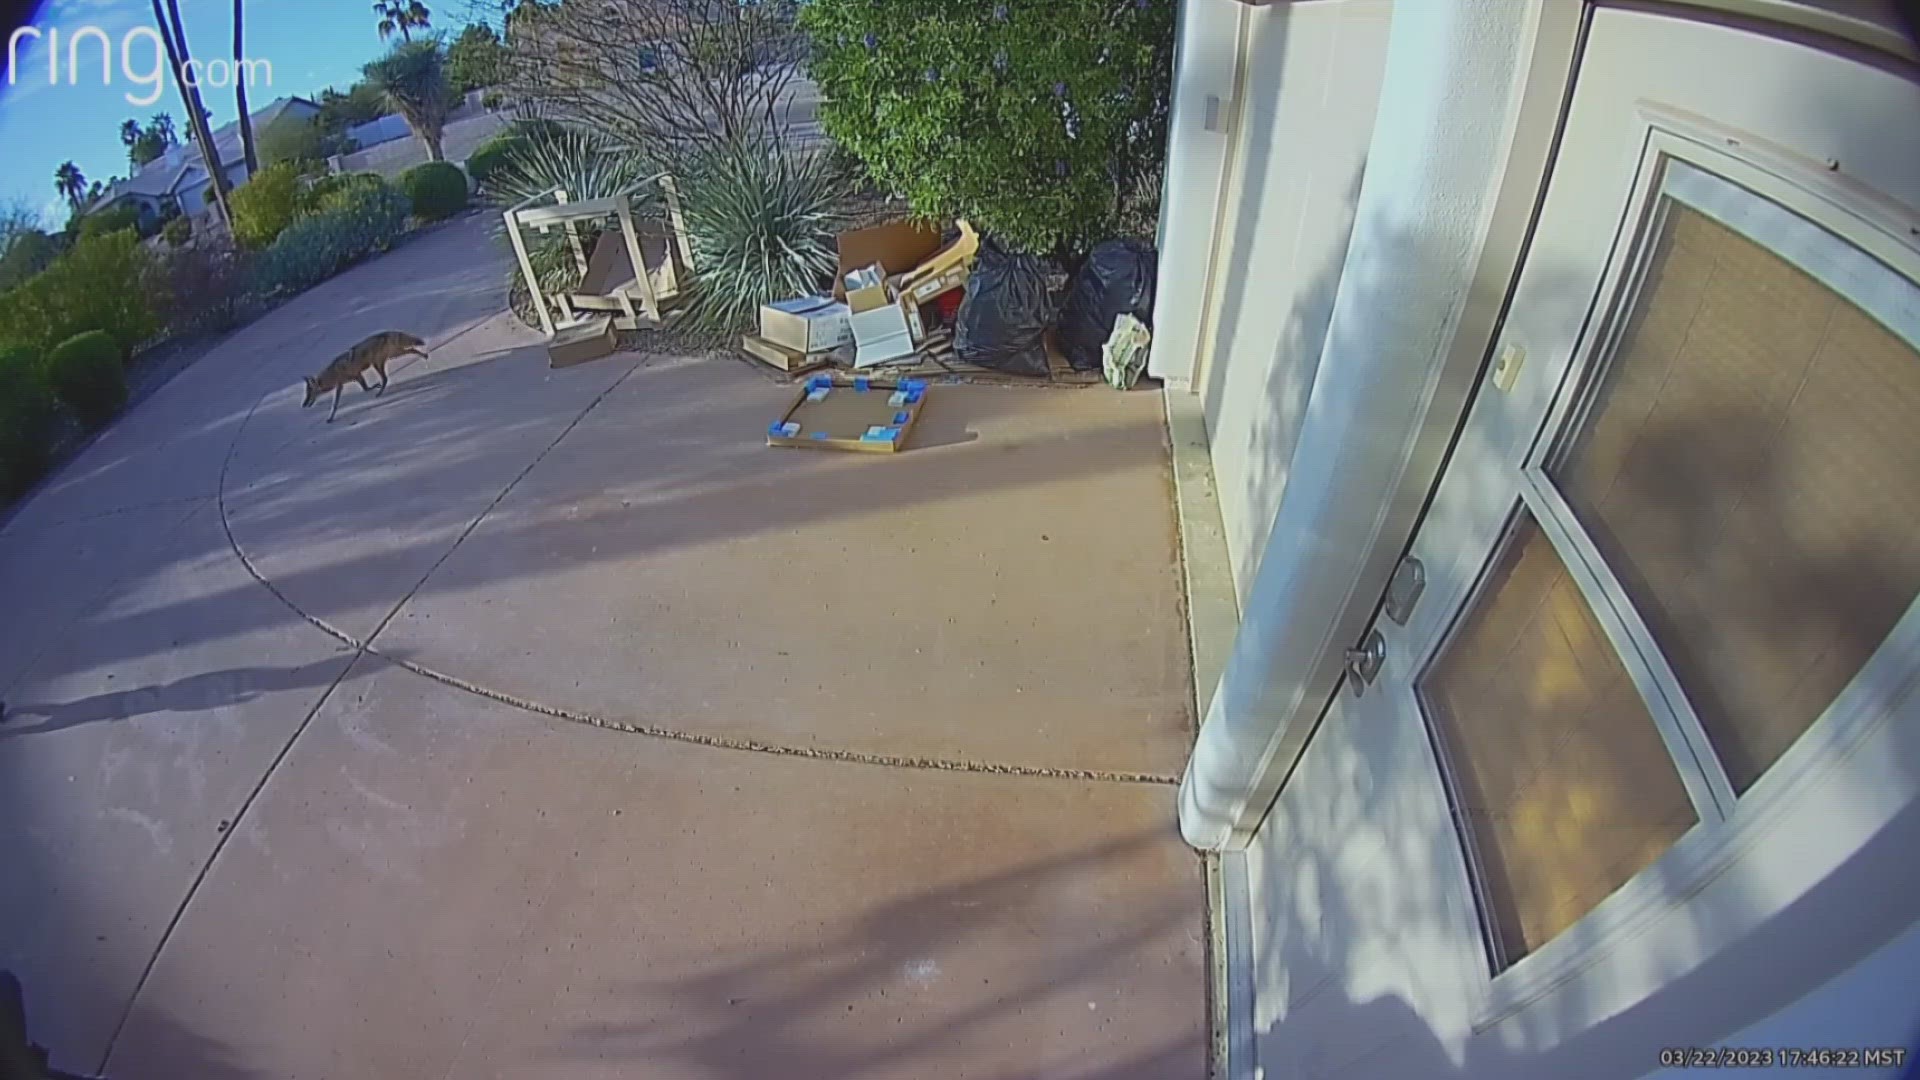 A mother in Scottsdale was shocked to see a coyote walk into her front yard and attack her young child.